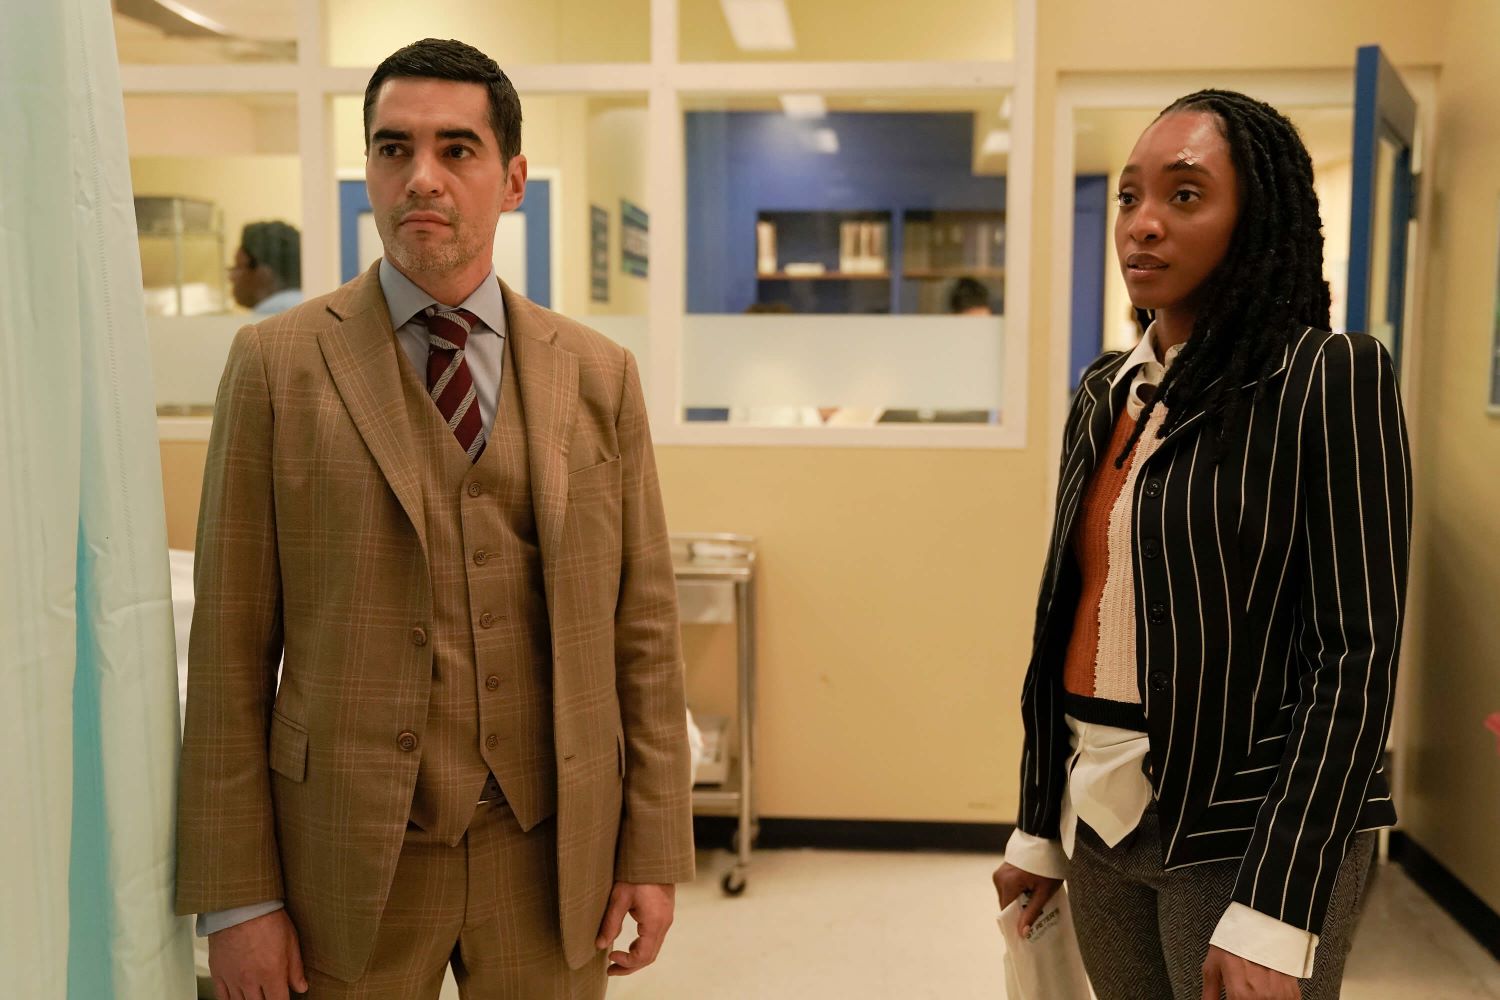 Ramón Rodríguez as Will Trent and Iantha Richardson as Faith Mitchell in 'Will Trent' on ABC, which hasn't been renewed for season 2 yet. Will wears a tan three-piece suit over a light gray button-up shirt and maroon and white striped tie. Faith wears a black suit with thin white stripes over a brown and white sweater vest over a white button-up shirt and gray pants.